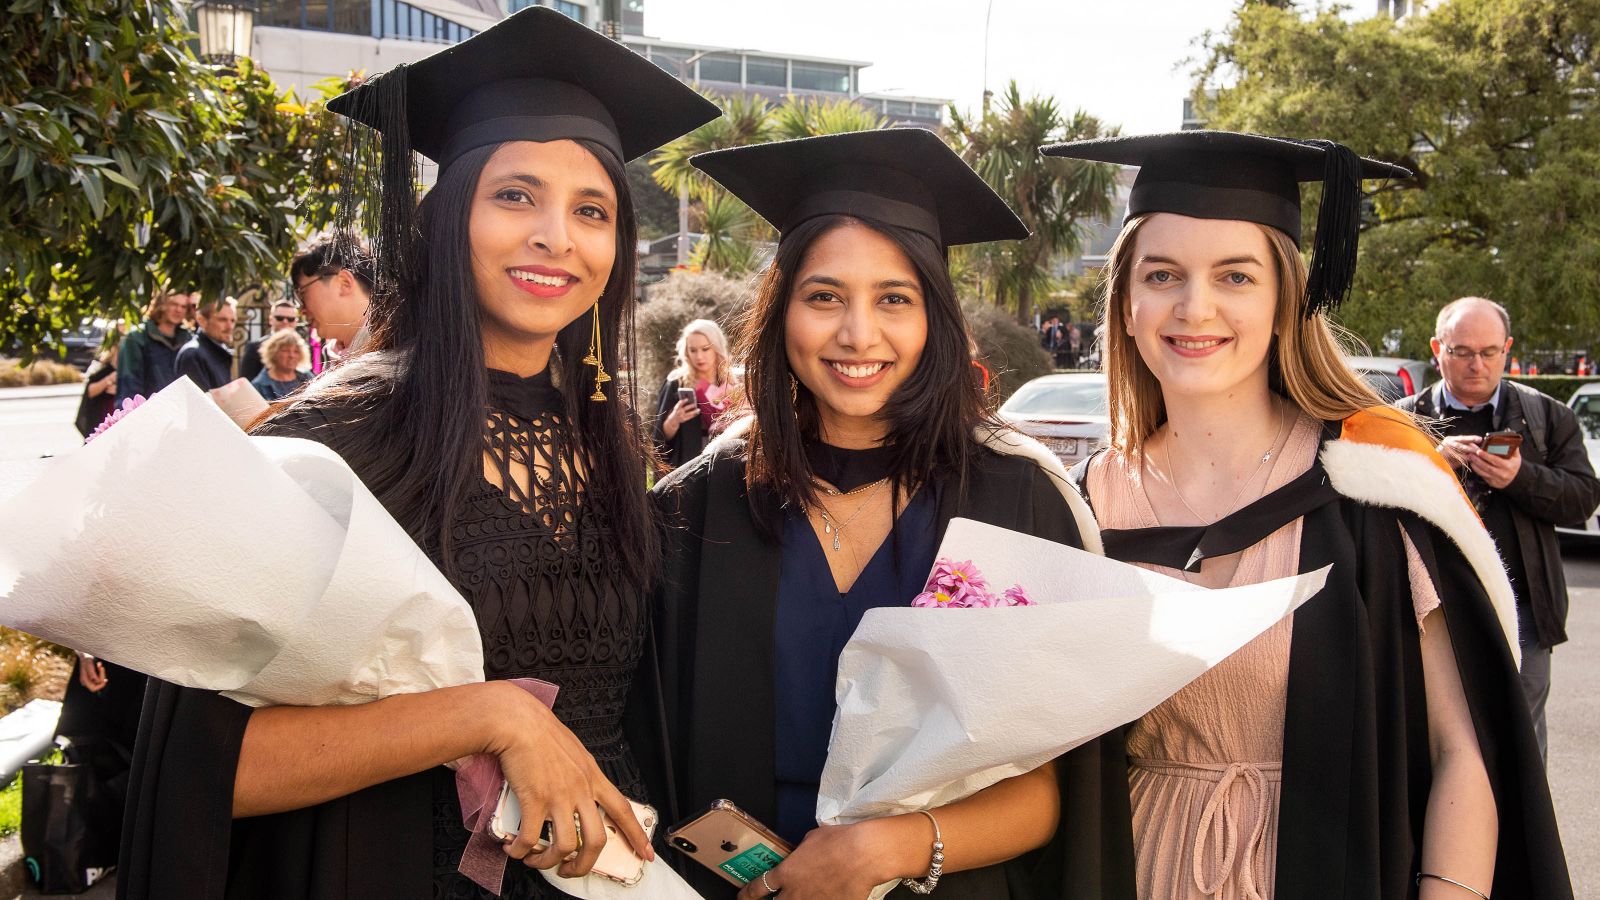 Three graduates, two who are holding flowers, smile for a photo during the graduate street parade.